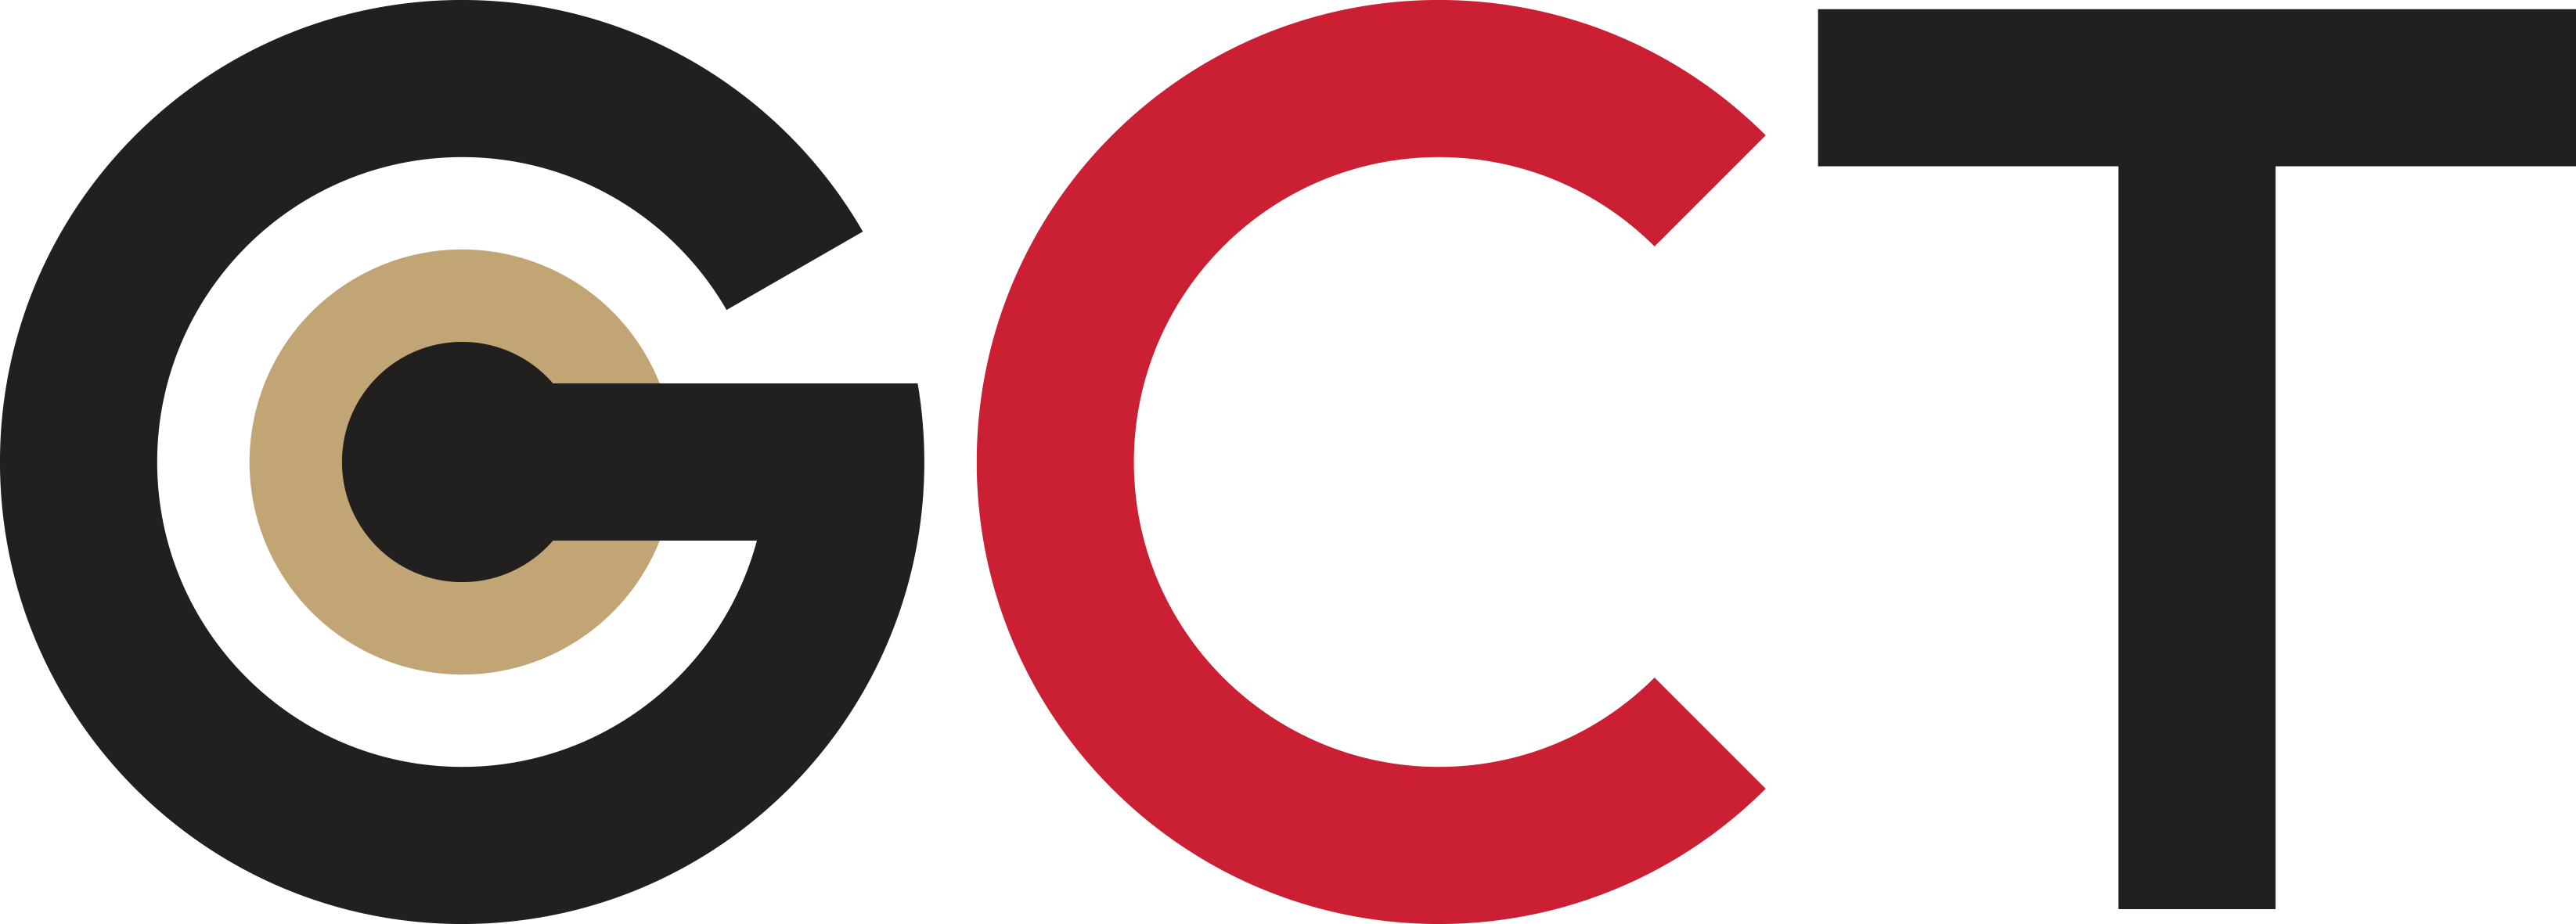 Global Connector Technology, Limited (GCT) LOGO